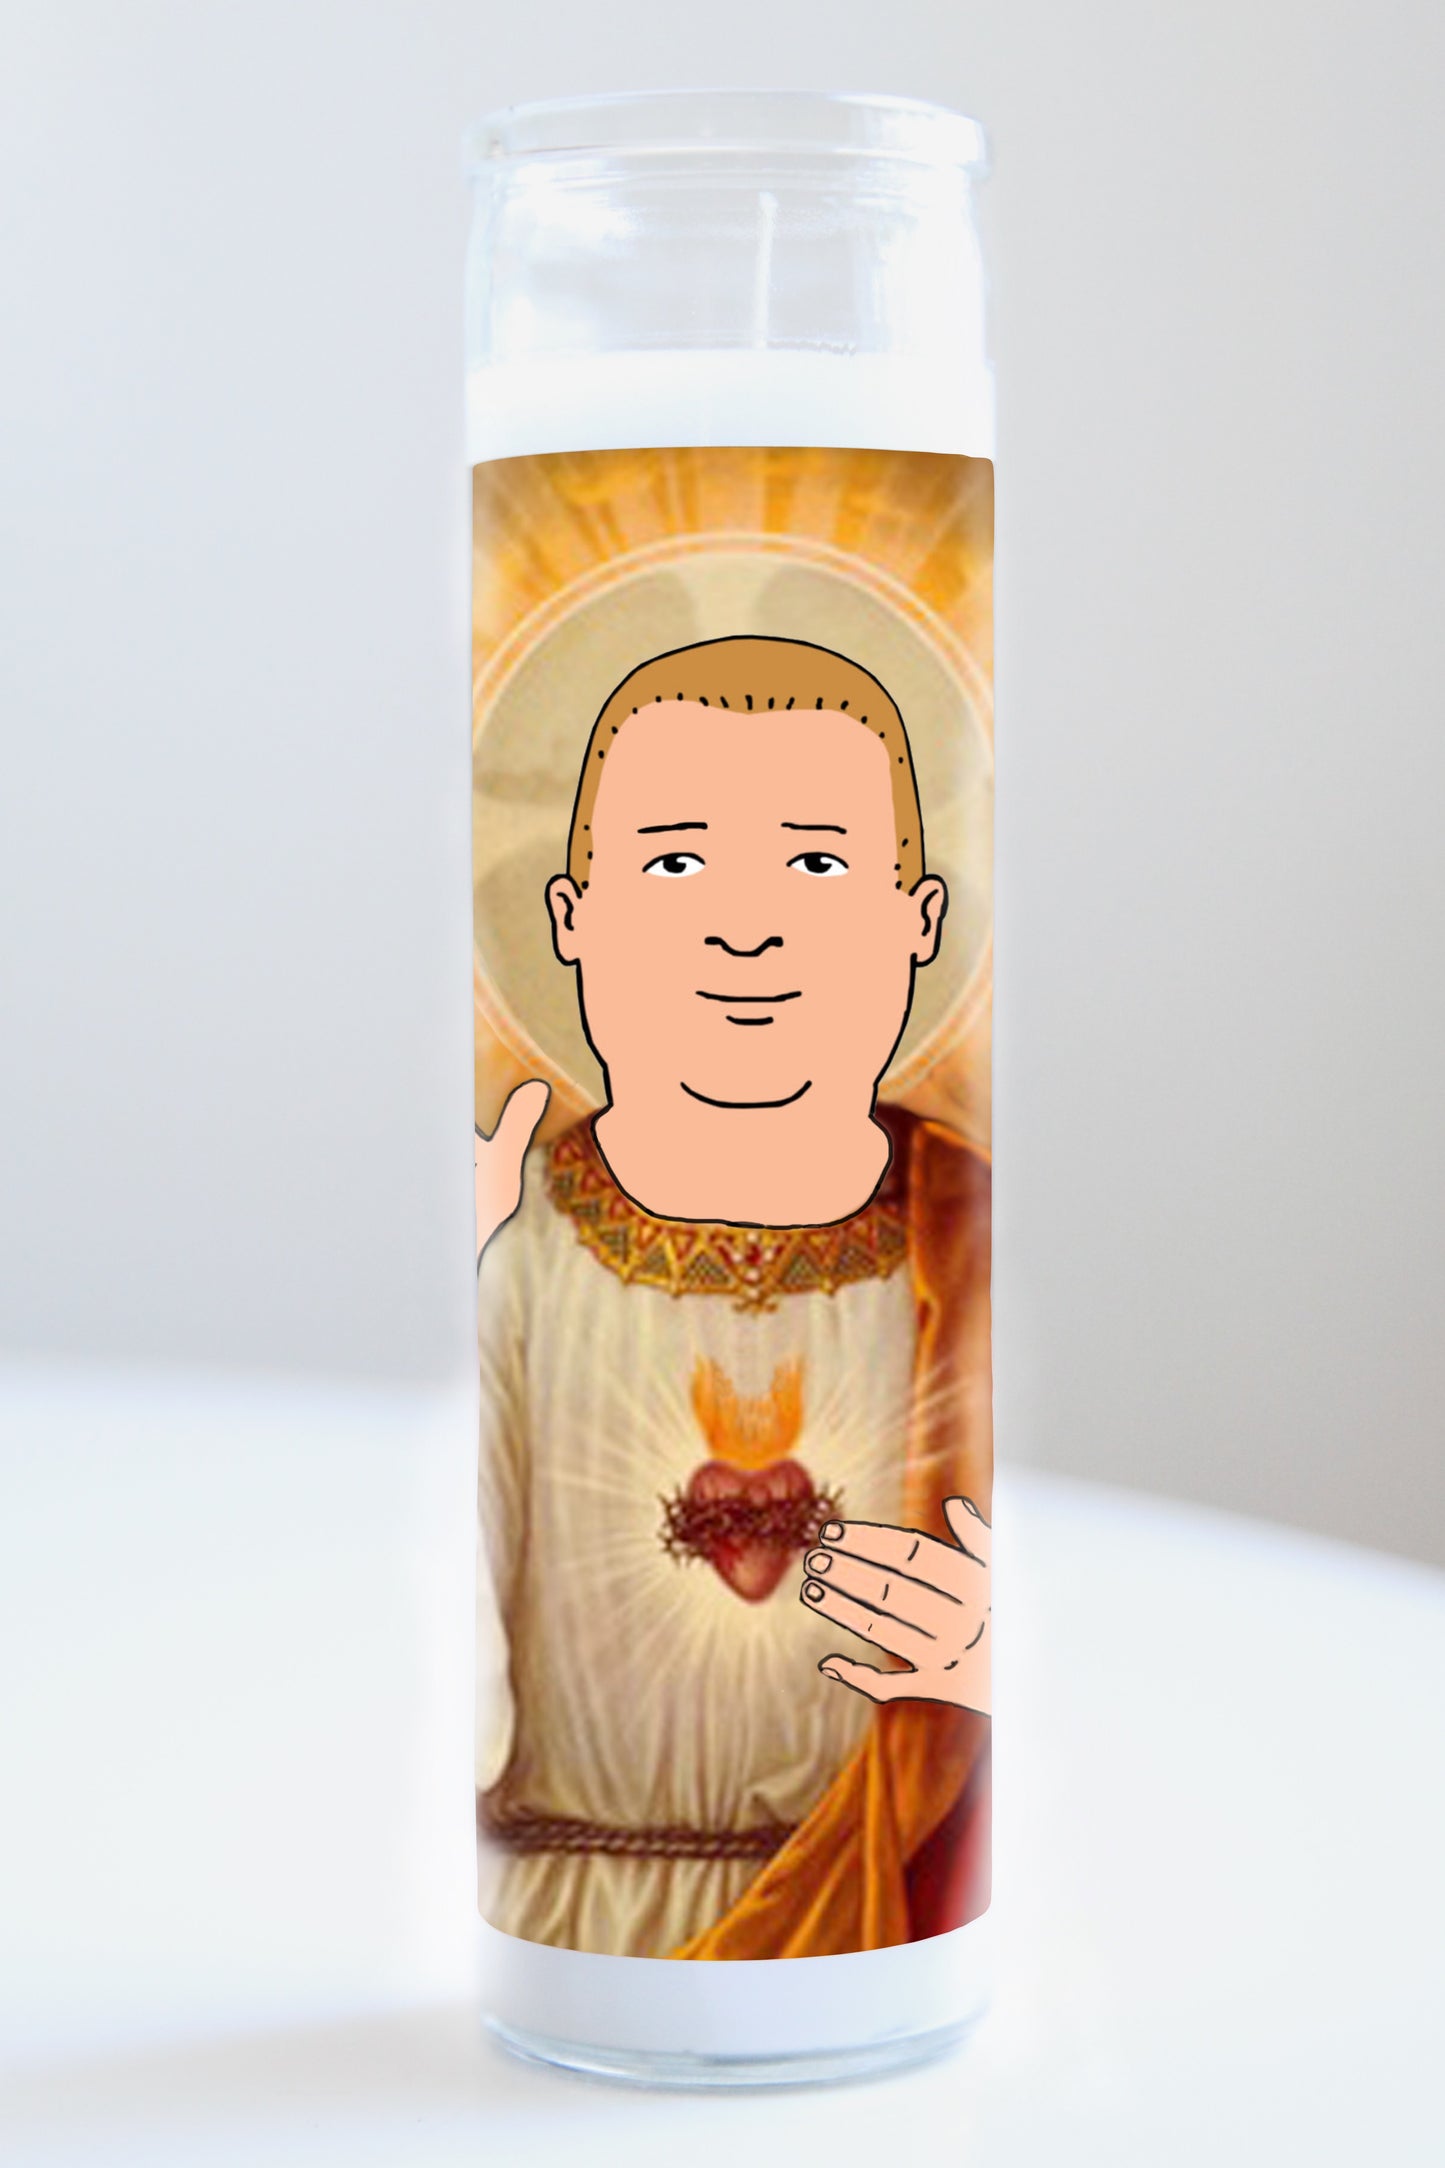 Bobby Hill (King of the Hill)